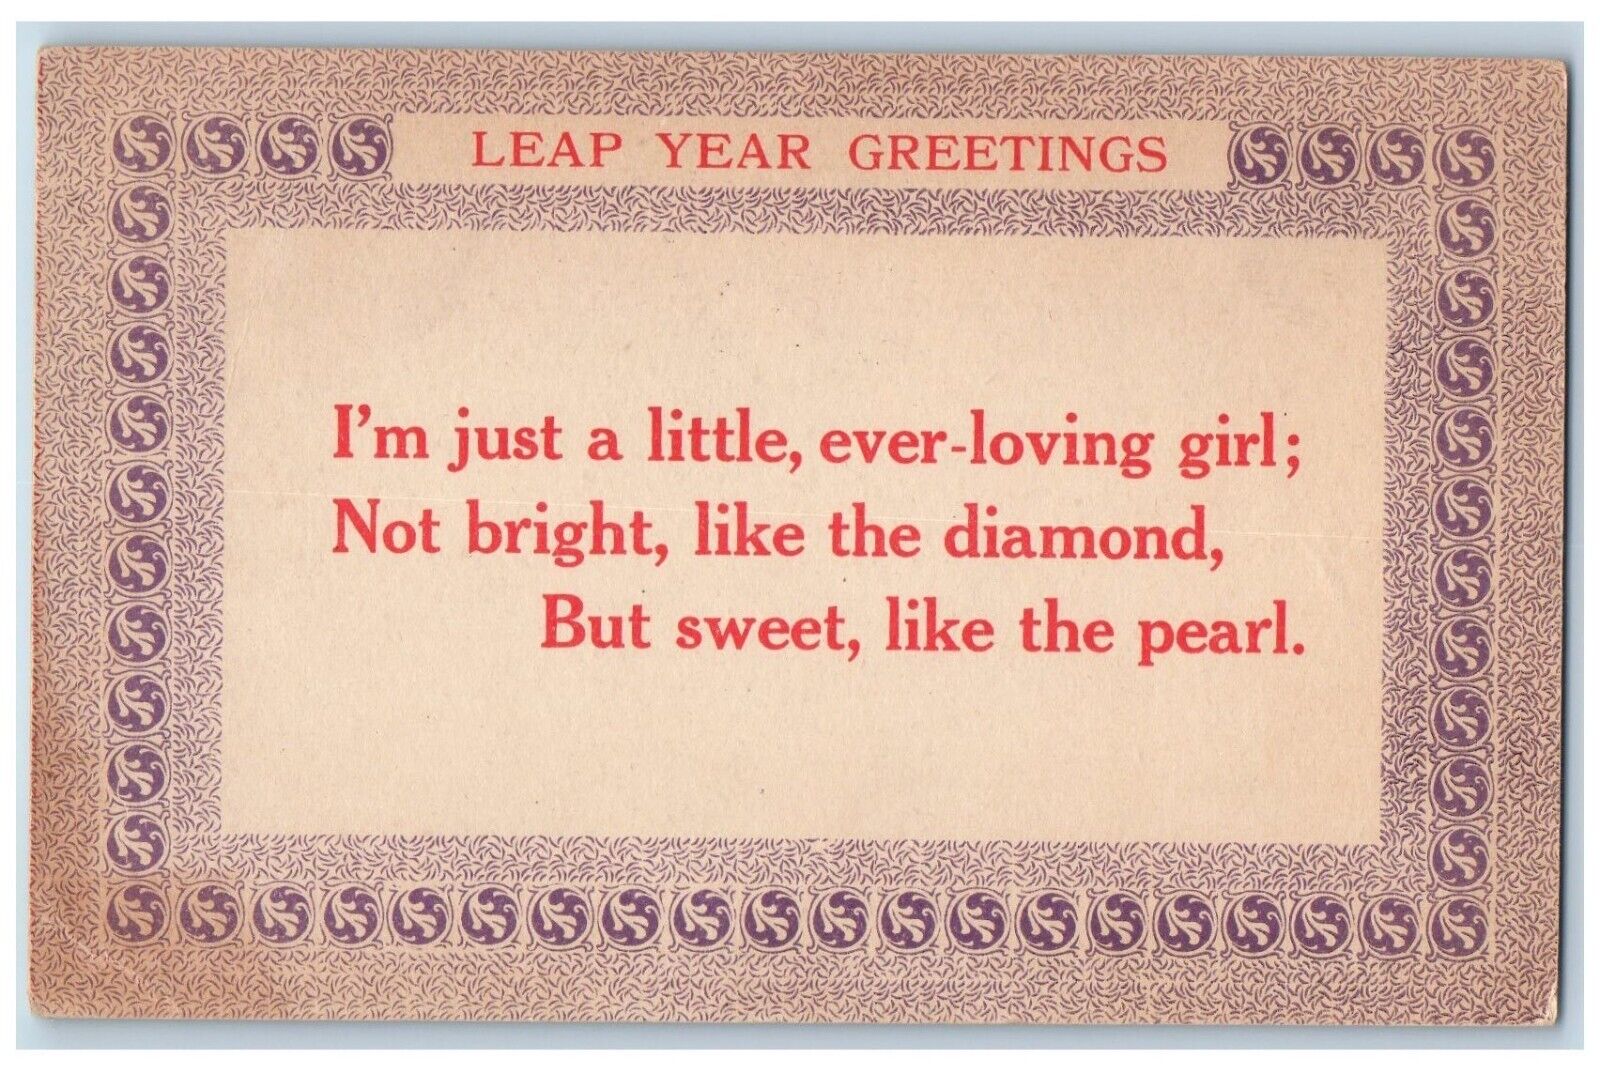 Winfield Kansas KS Postcard Leap Year Greetings Motto 1912 Posted Antique